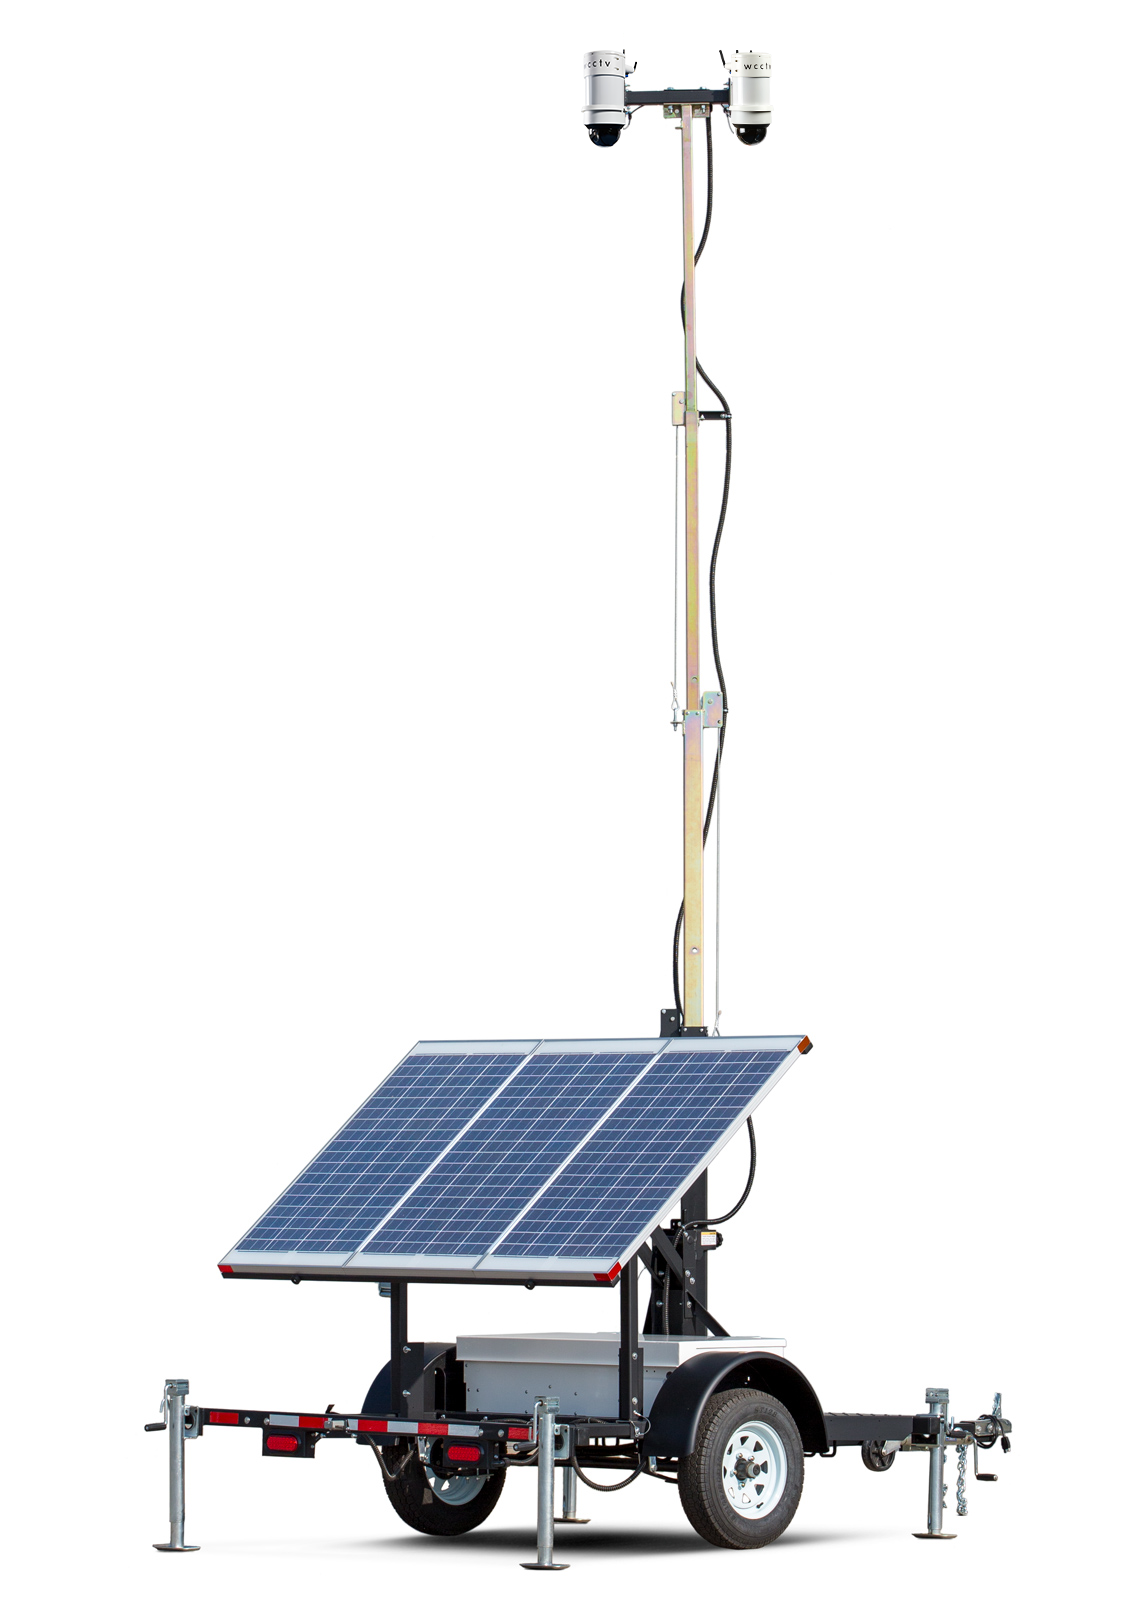 Wcctv Mobile Surveillance Security Camera Trailer With Solar Panels Pass Security